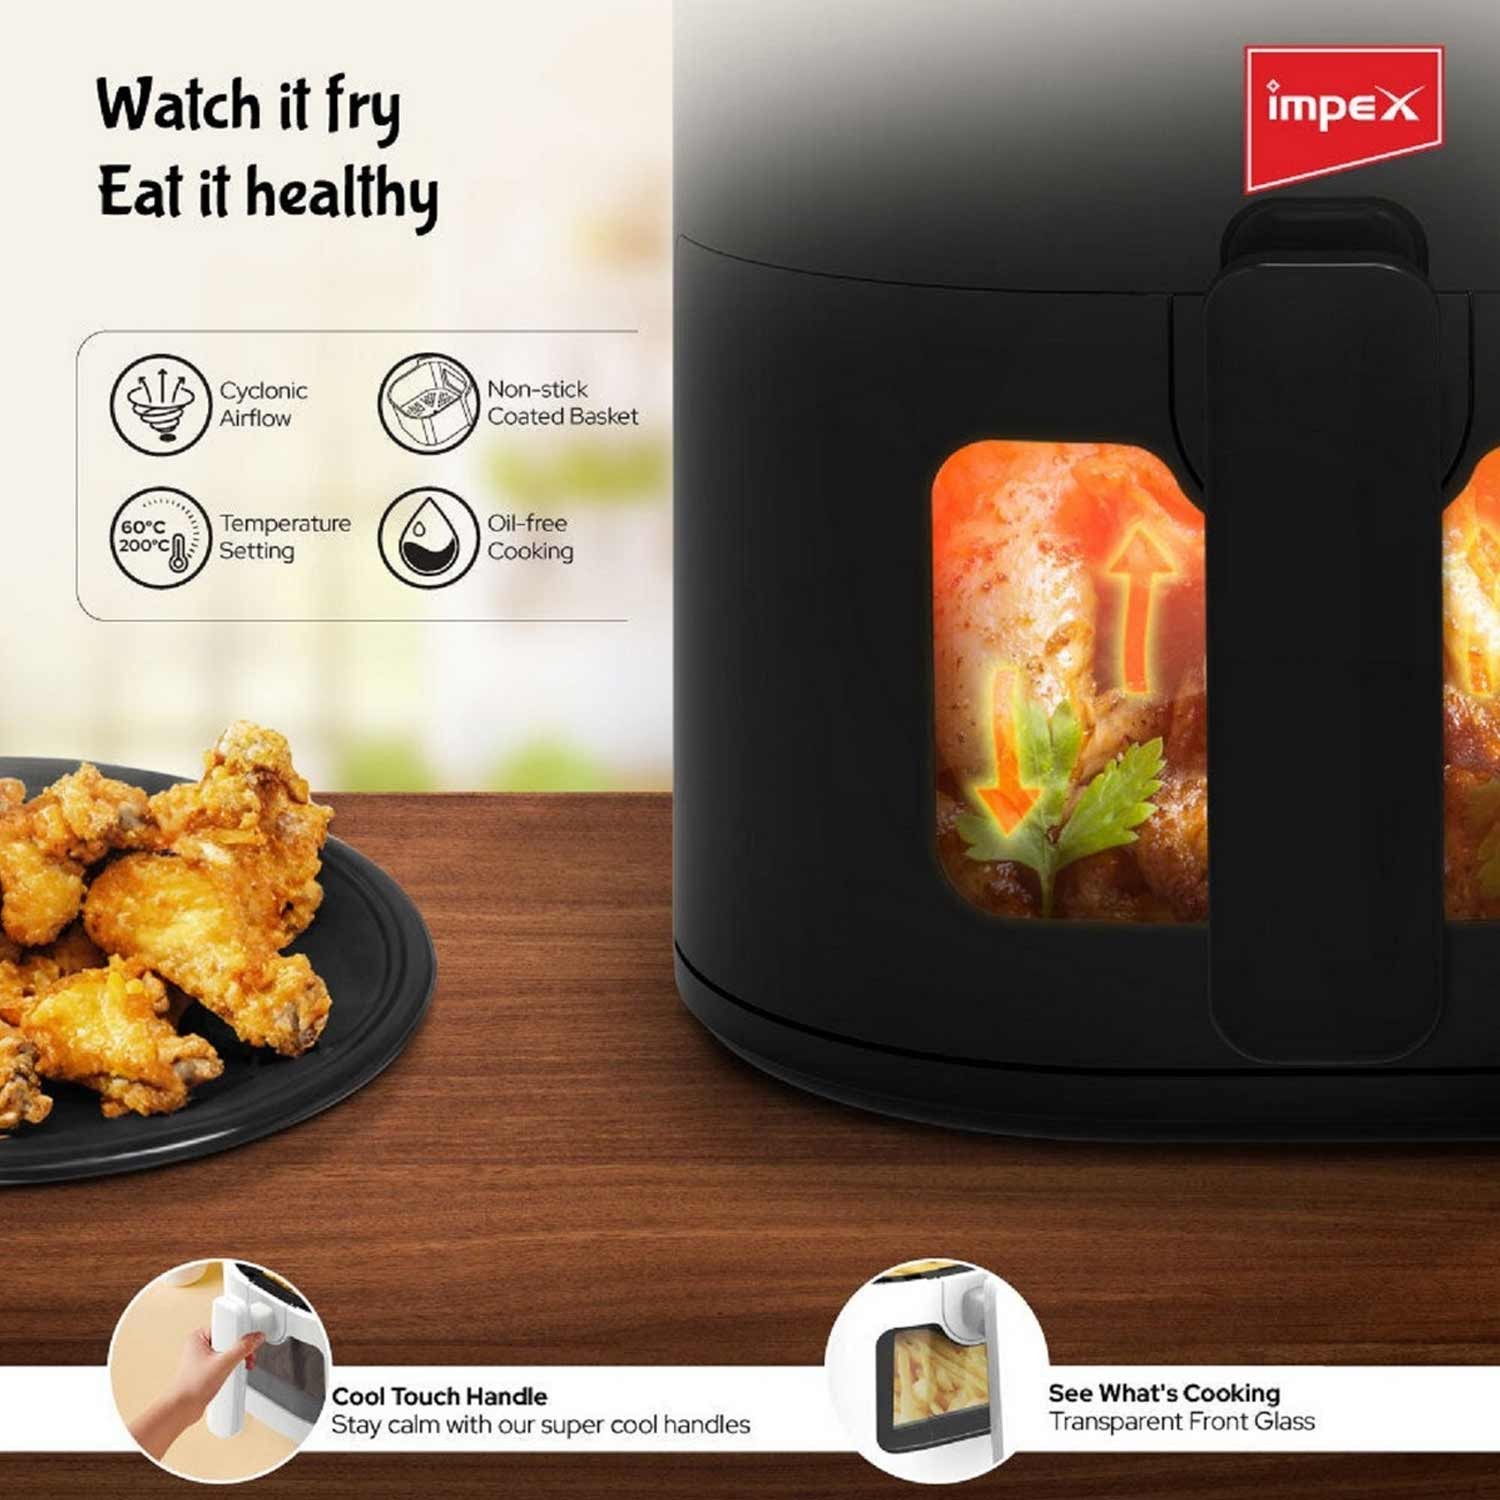 Impex Digital Air Fryer 4.5 L Smart Fry DS45, Transparent Window 1200 W, 80% Less Oil, Instant Electric Air Fryer, Auto Cut Off, Fry, Grill, Roast, Steam, and Bake 2 Years Warranty